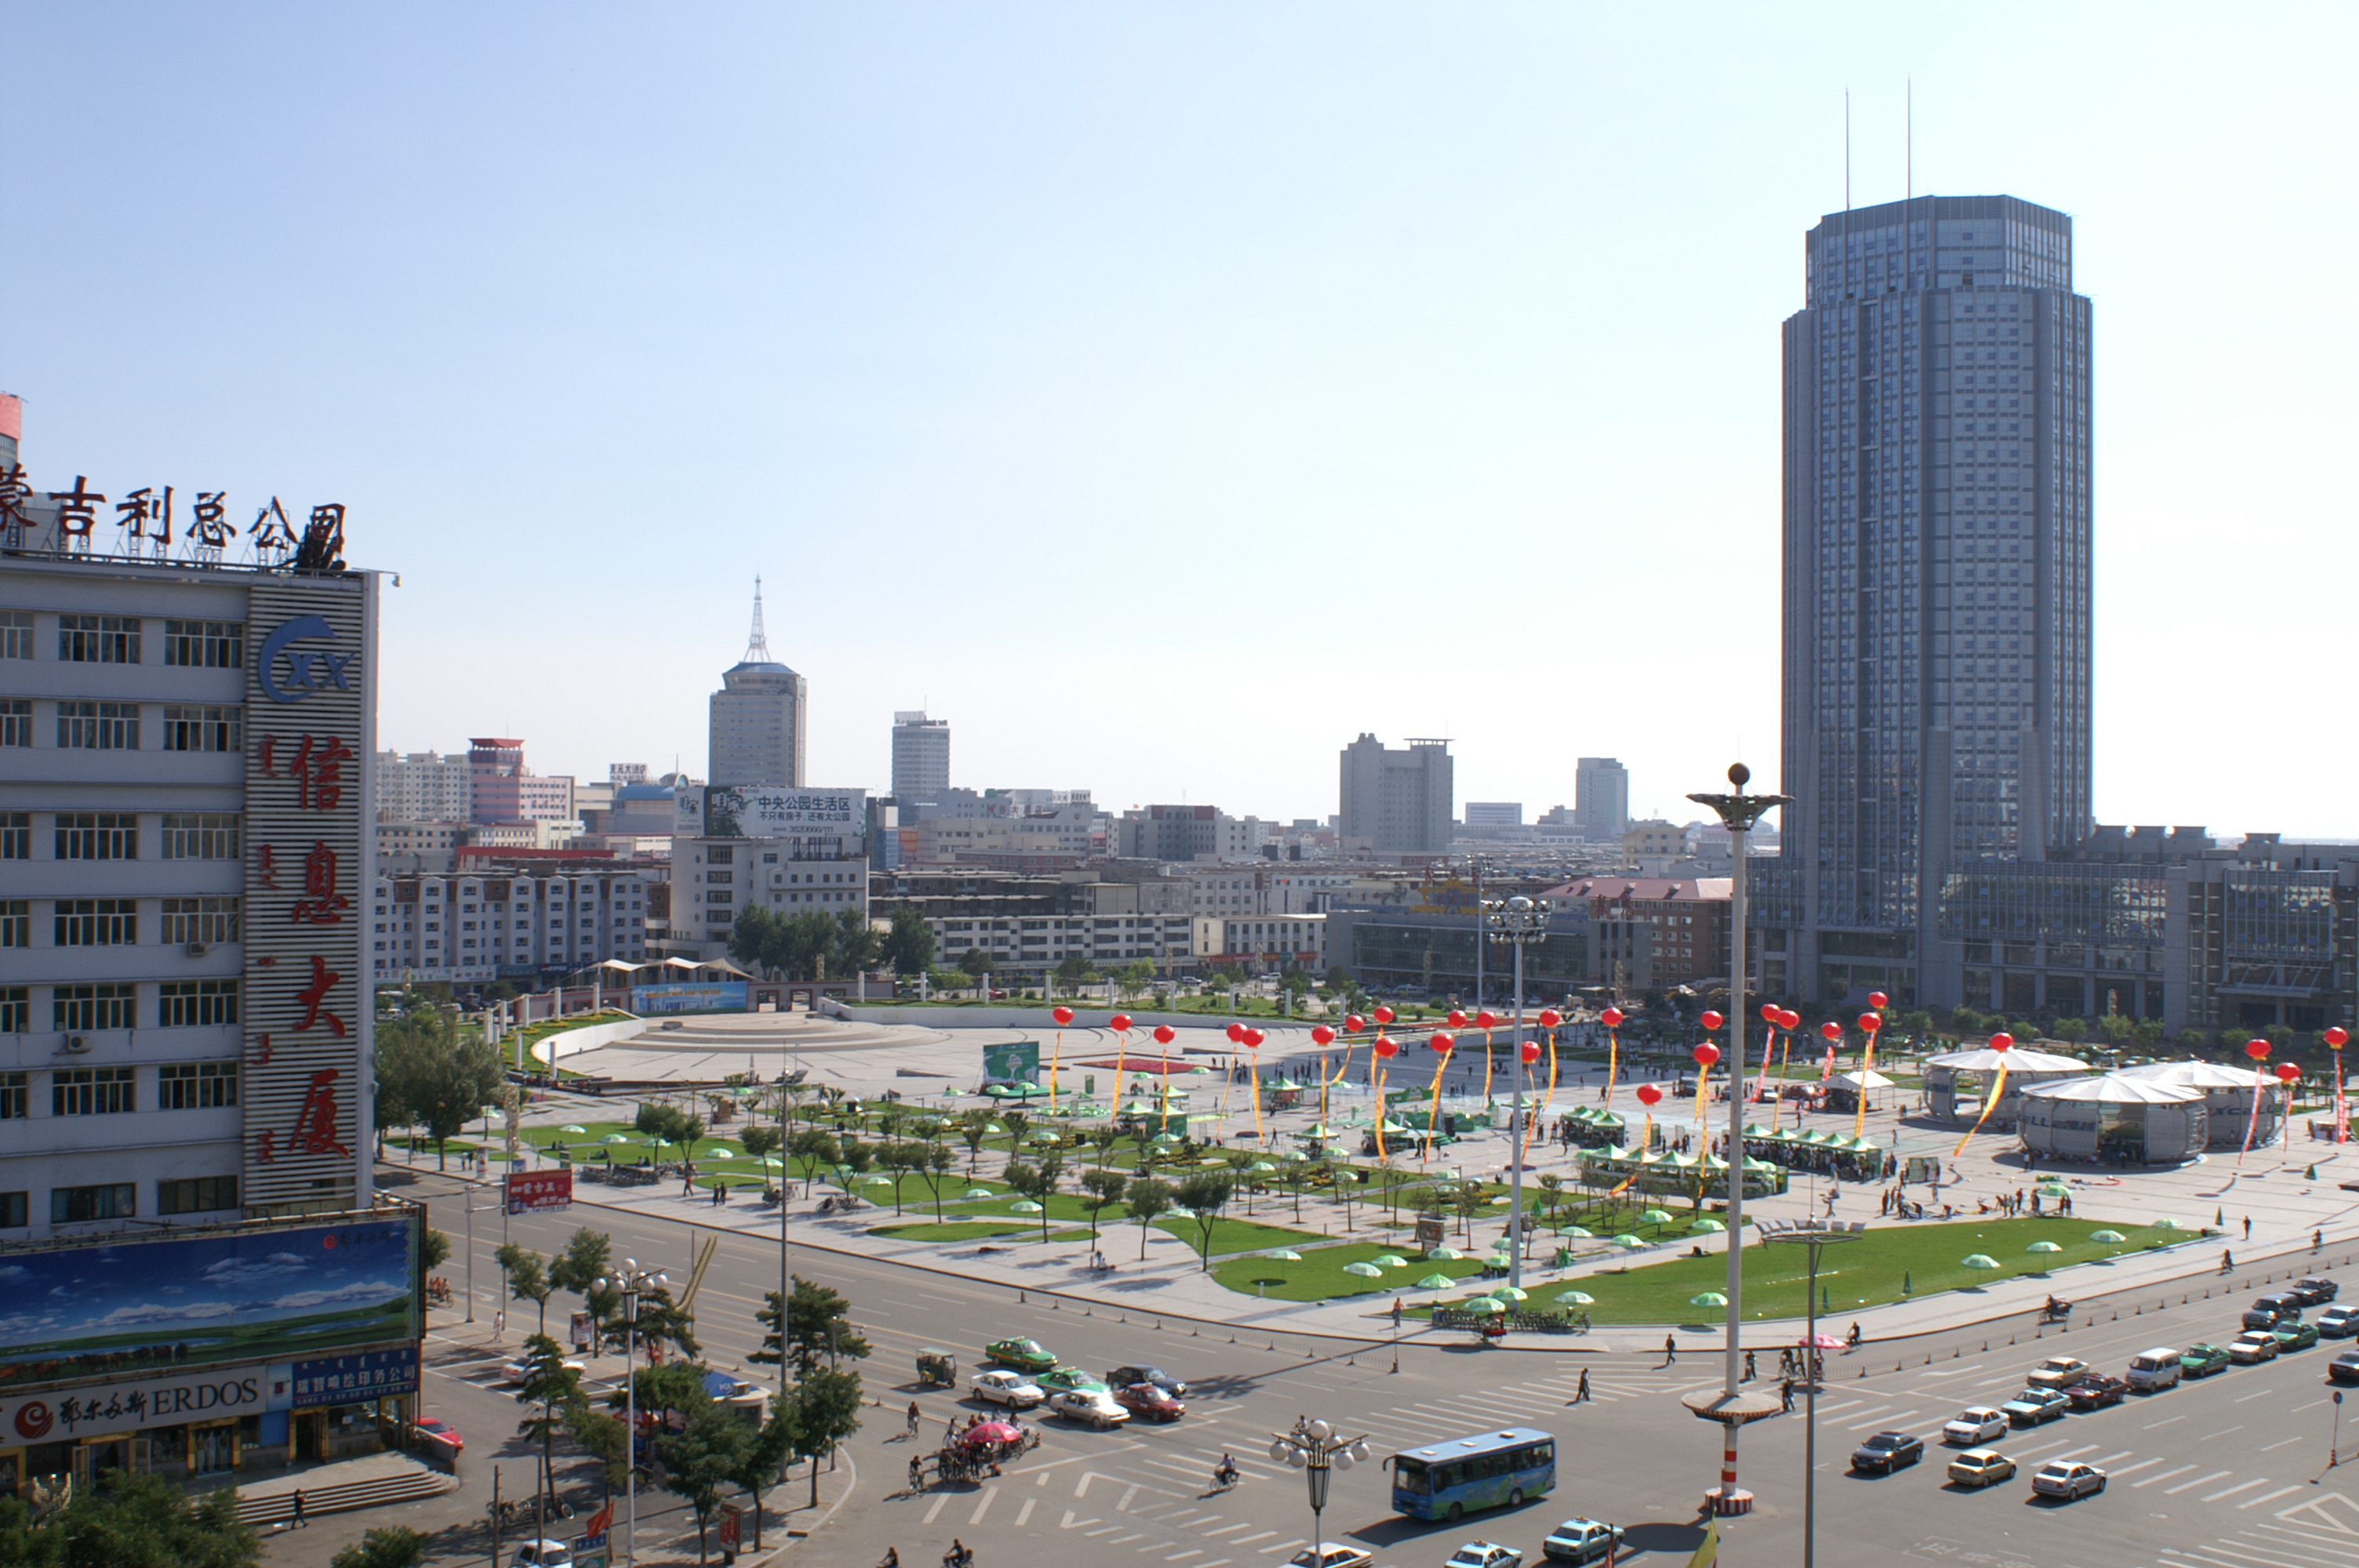 Hohhot_Central_Square.jpg